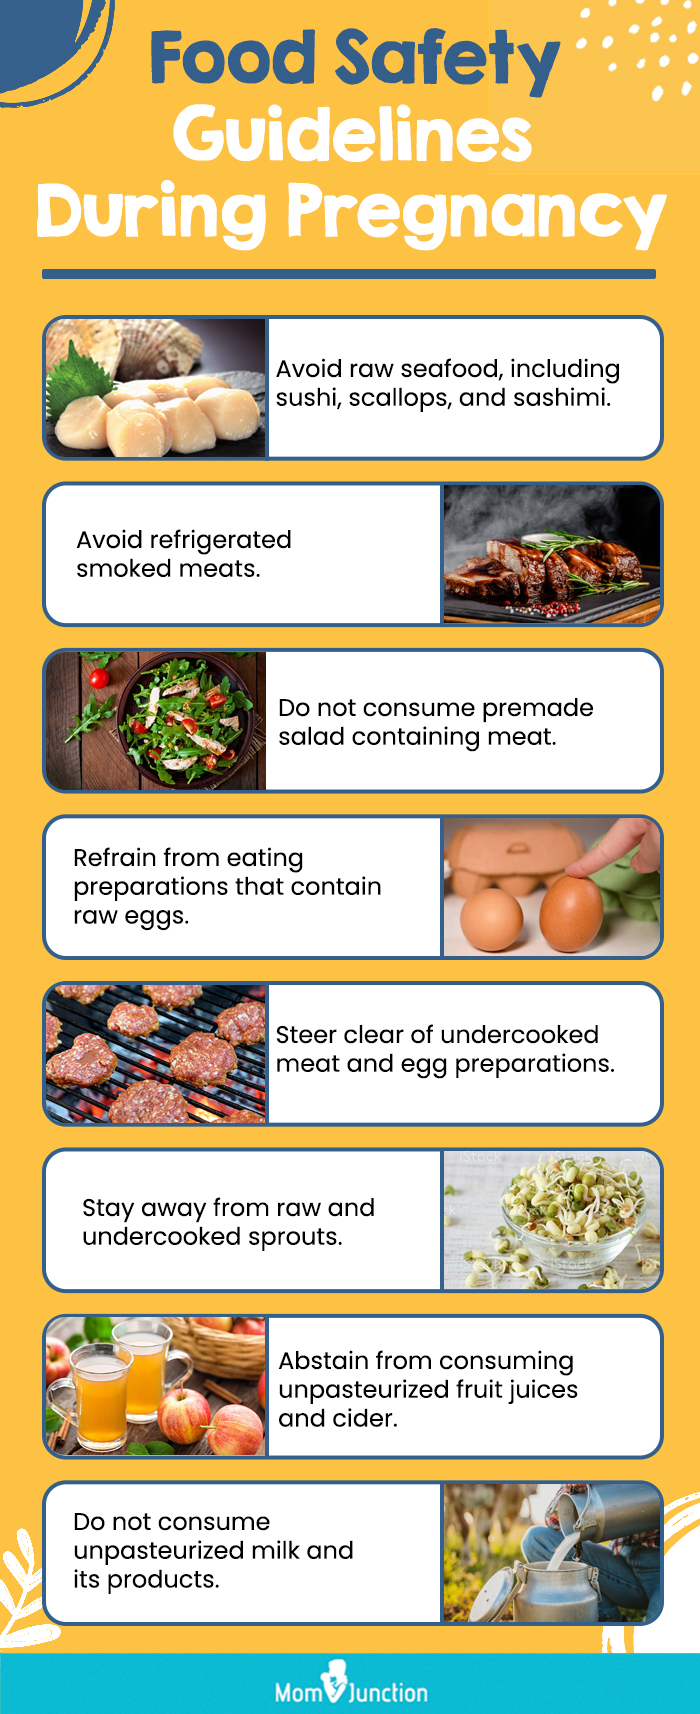 Food Safety Guidelines During Pregnancy (infographic)